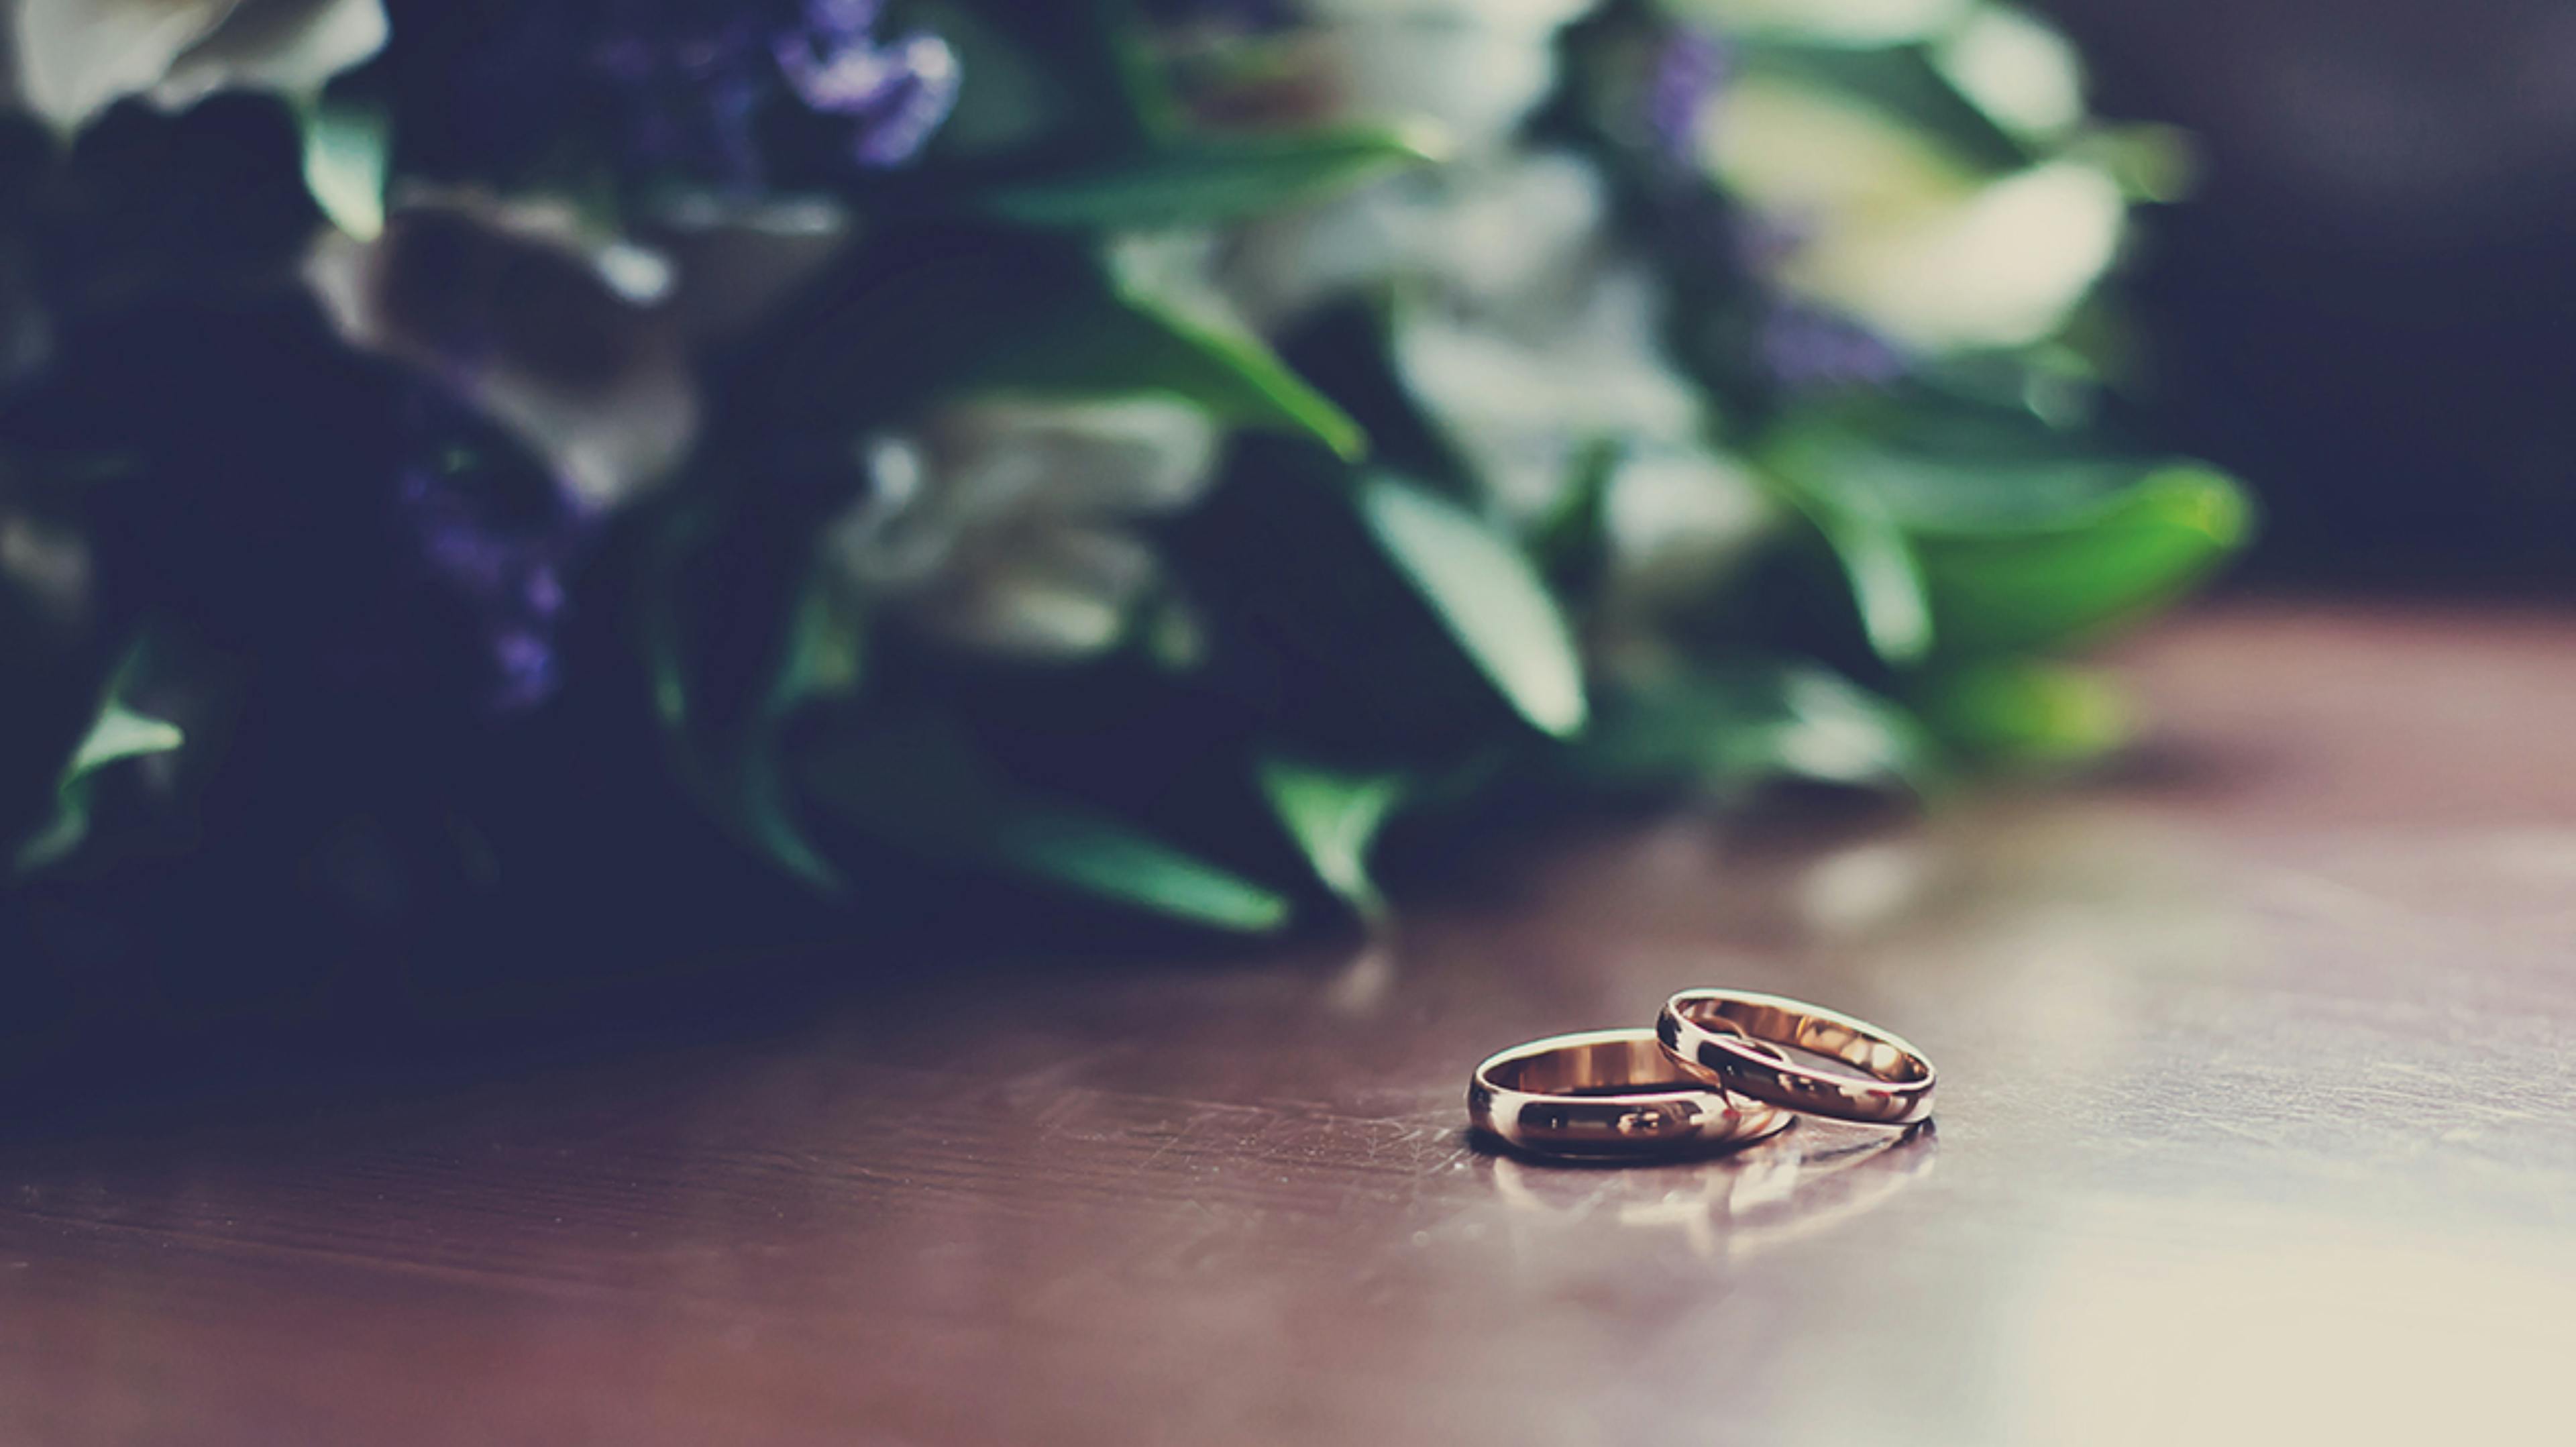 Eloping: The Cheap Wedding Solution?